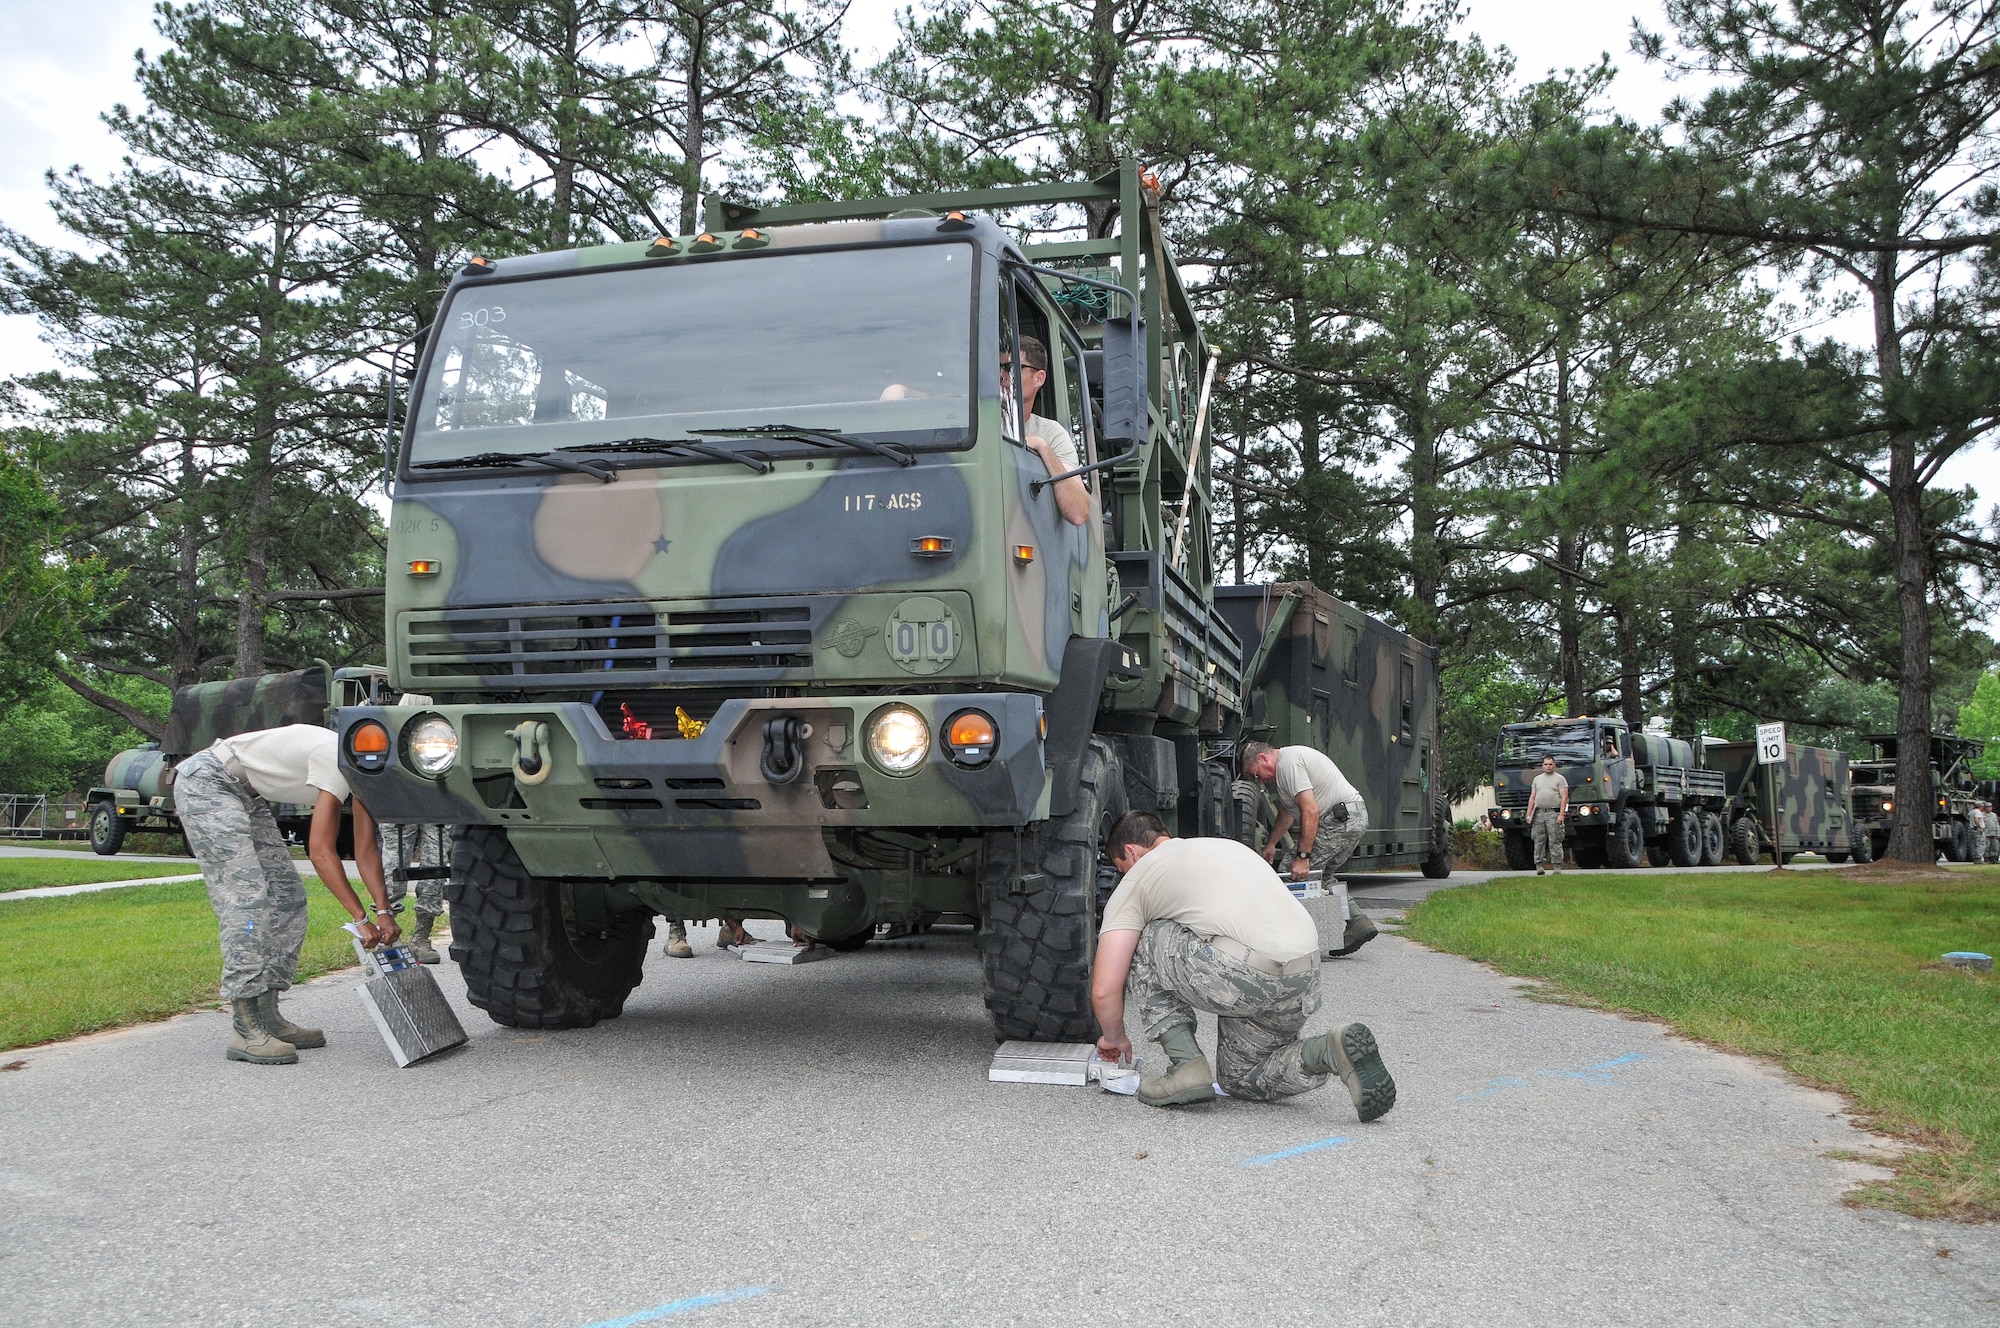 National Guard Master Sgt. Shane Shaw drives a truck on to scales at Hunter Army Airfield in Savannah, GA, April 21, 2012. Two trucks were used to position rolling equipment during the main site setup of the annual field training. (National Guard photo by Tech. Sgt. Charles Delano/Released)